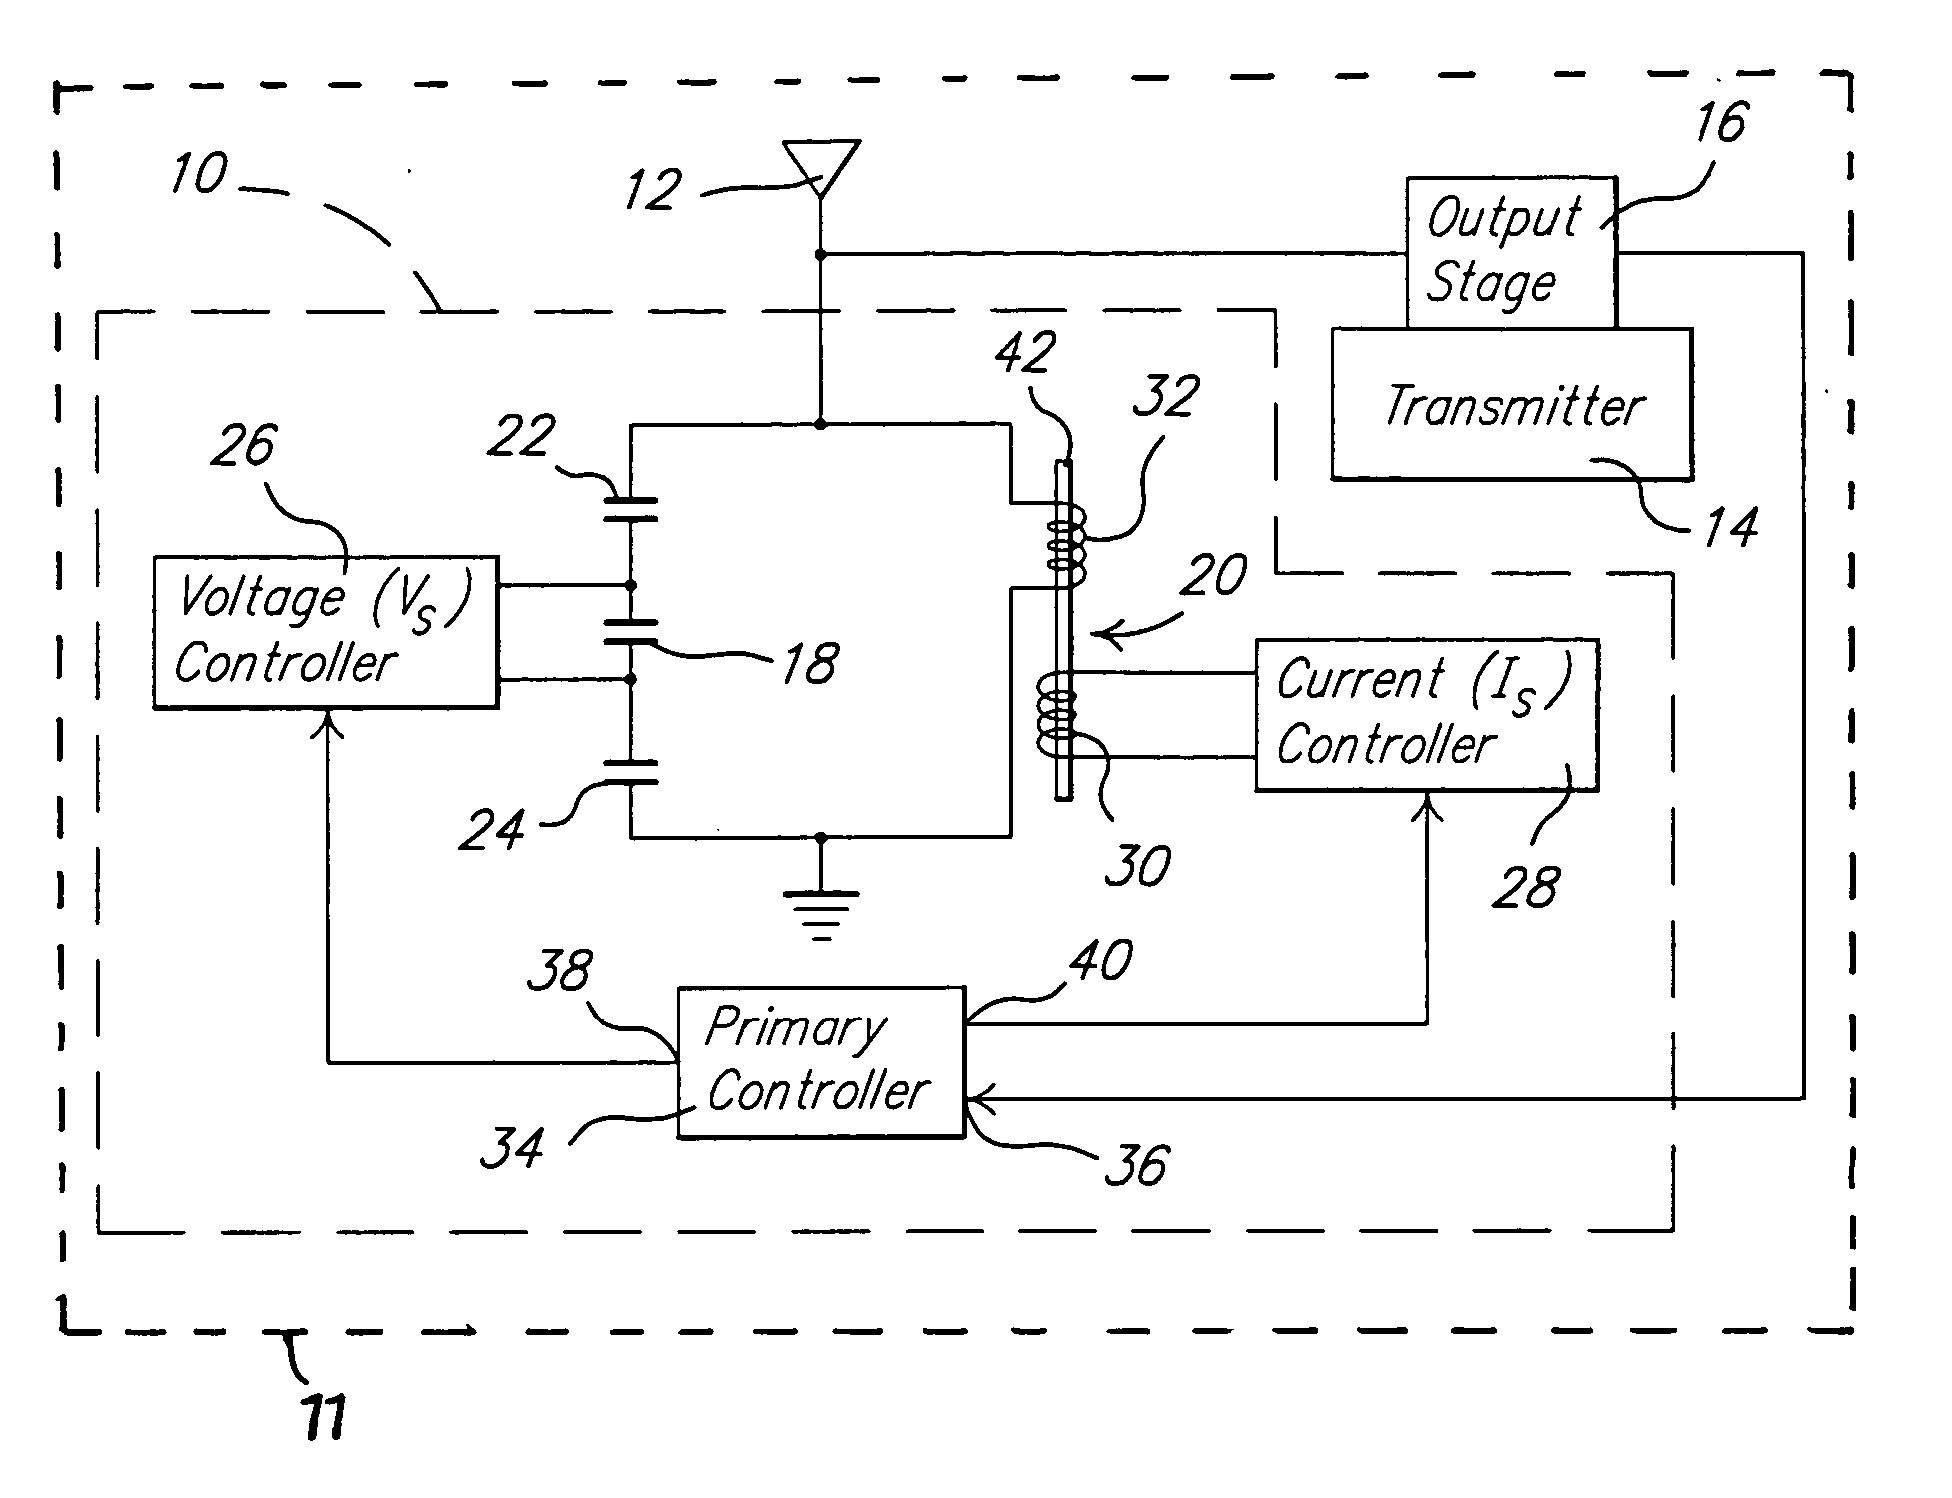 Electrically tuned resonance circuit using piezo and magnetostrictive materials